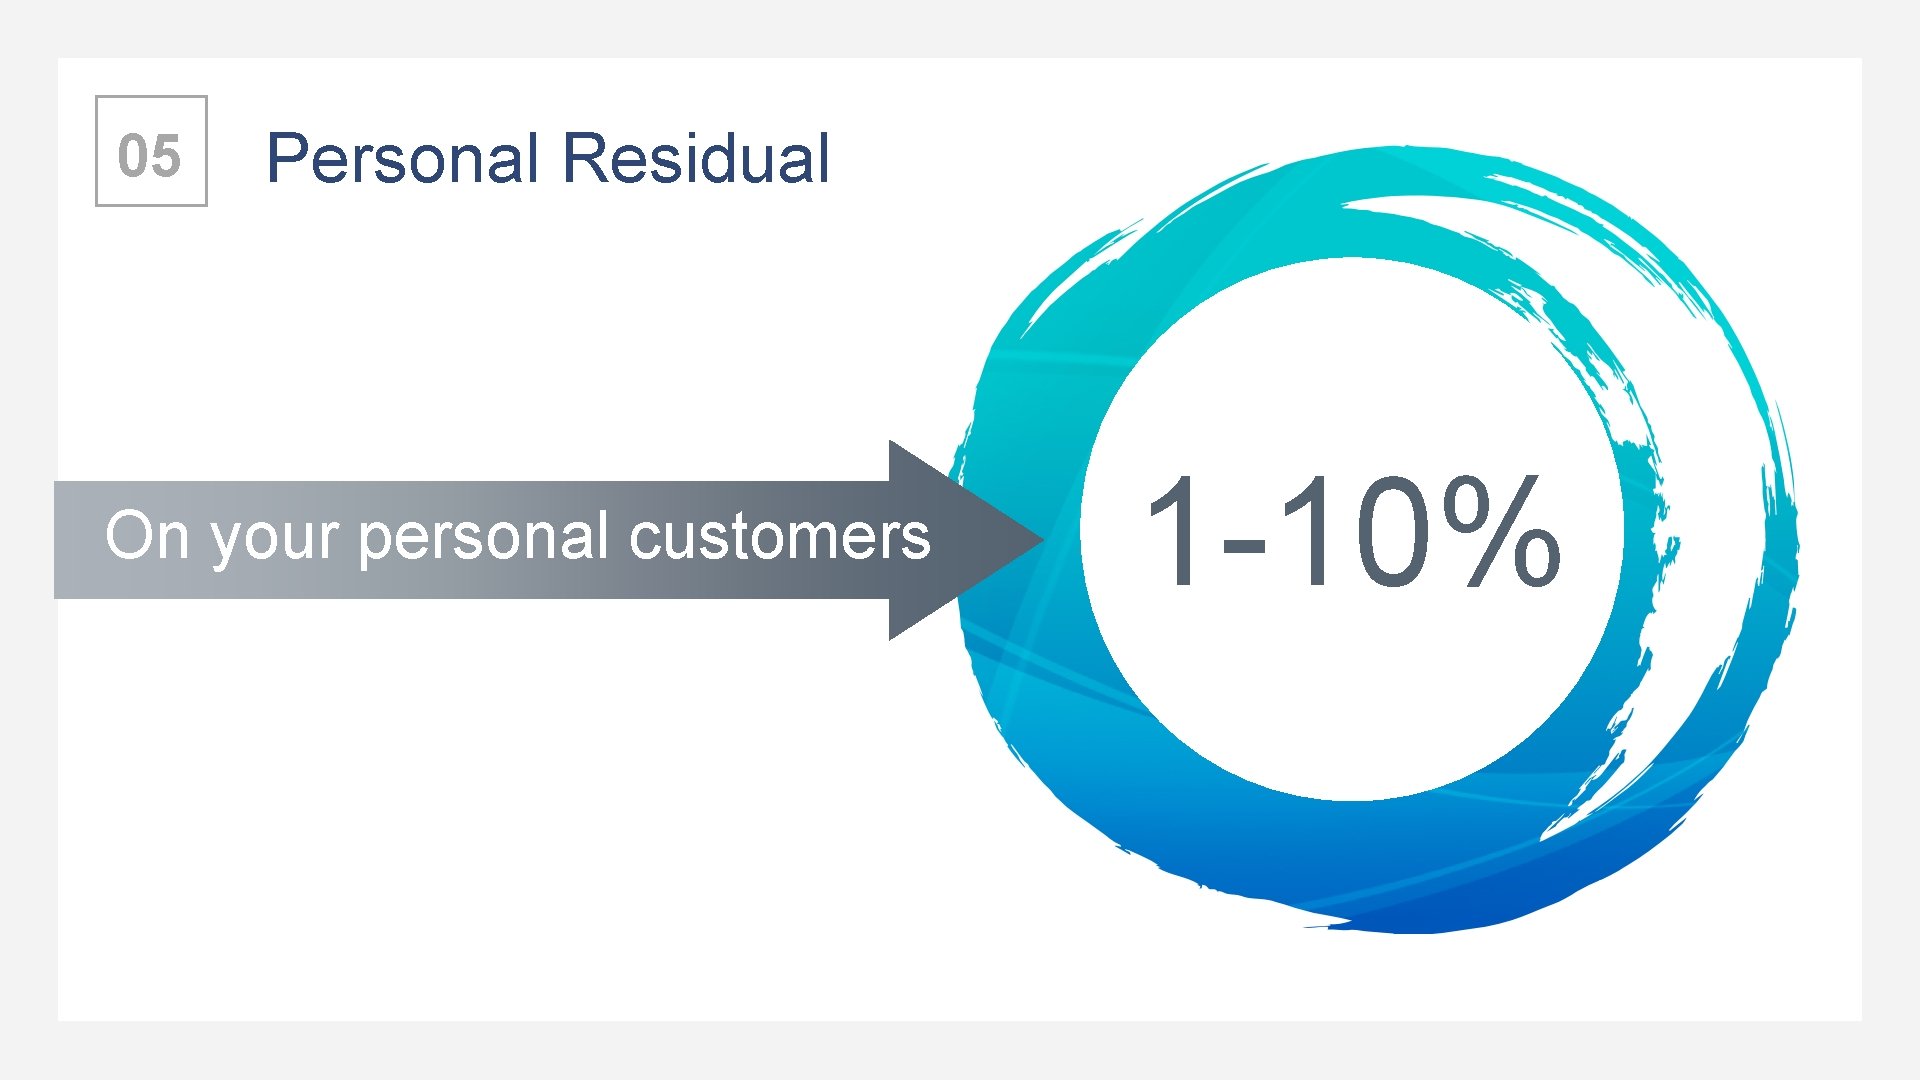 05 Personal Residual On your personal customers 1 -10% 